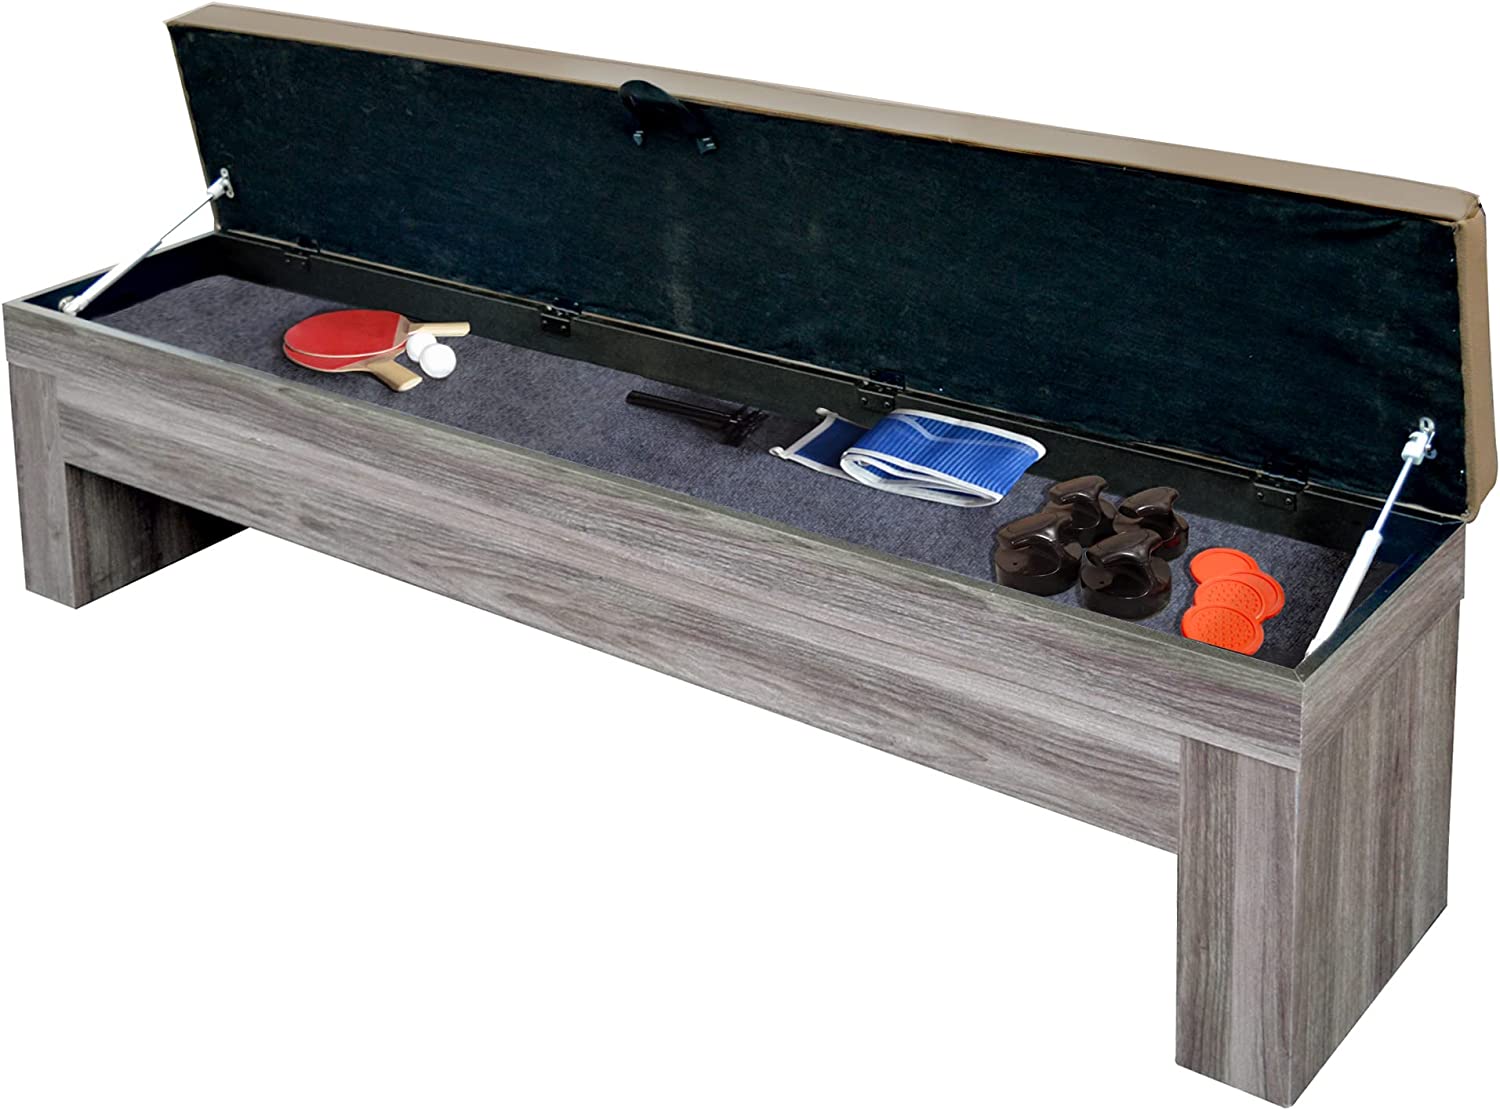 Hathaway Driftwood 7-ft Air Hockey Table Tennis Combination with Dining Top, Two Storage Benches, Free Accessories